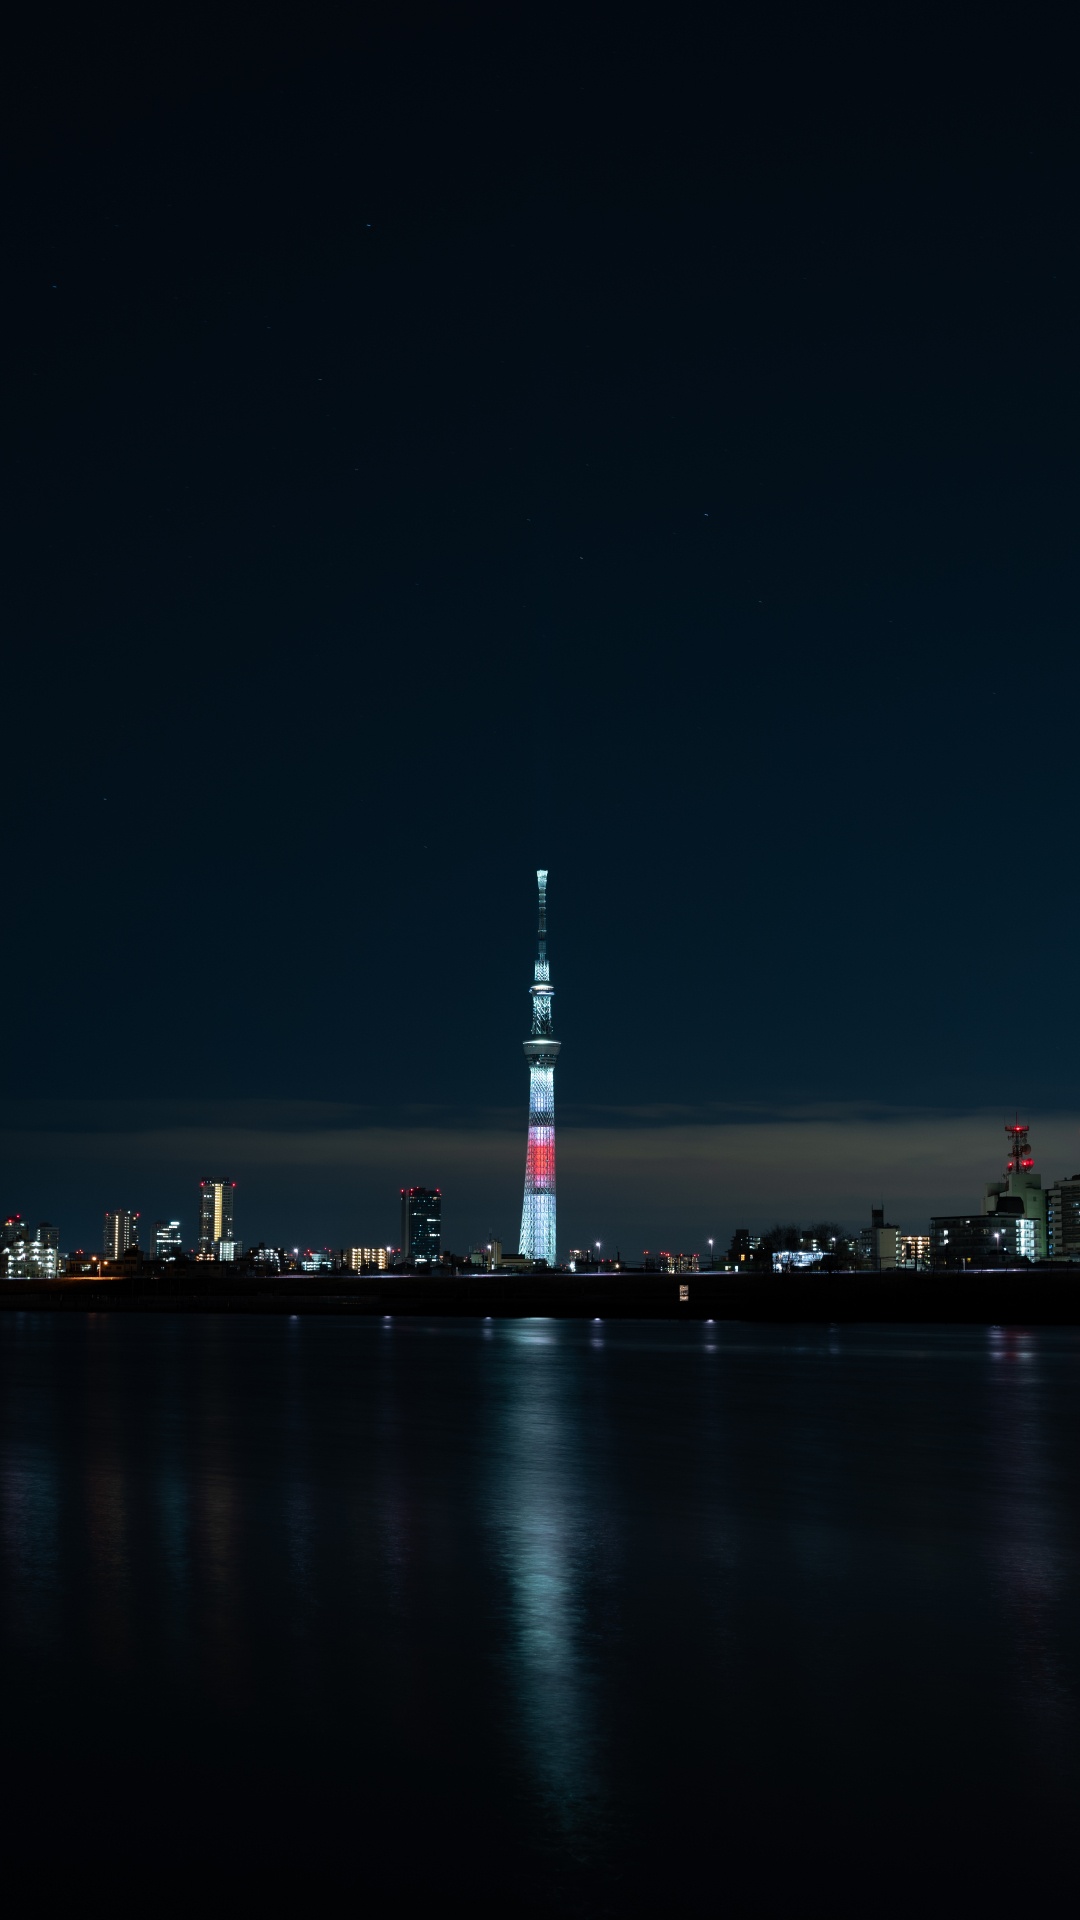 White and Red Tower Near Body of Water During Night Time. Wallpaper in 1080x1920 Resolution